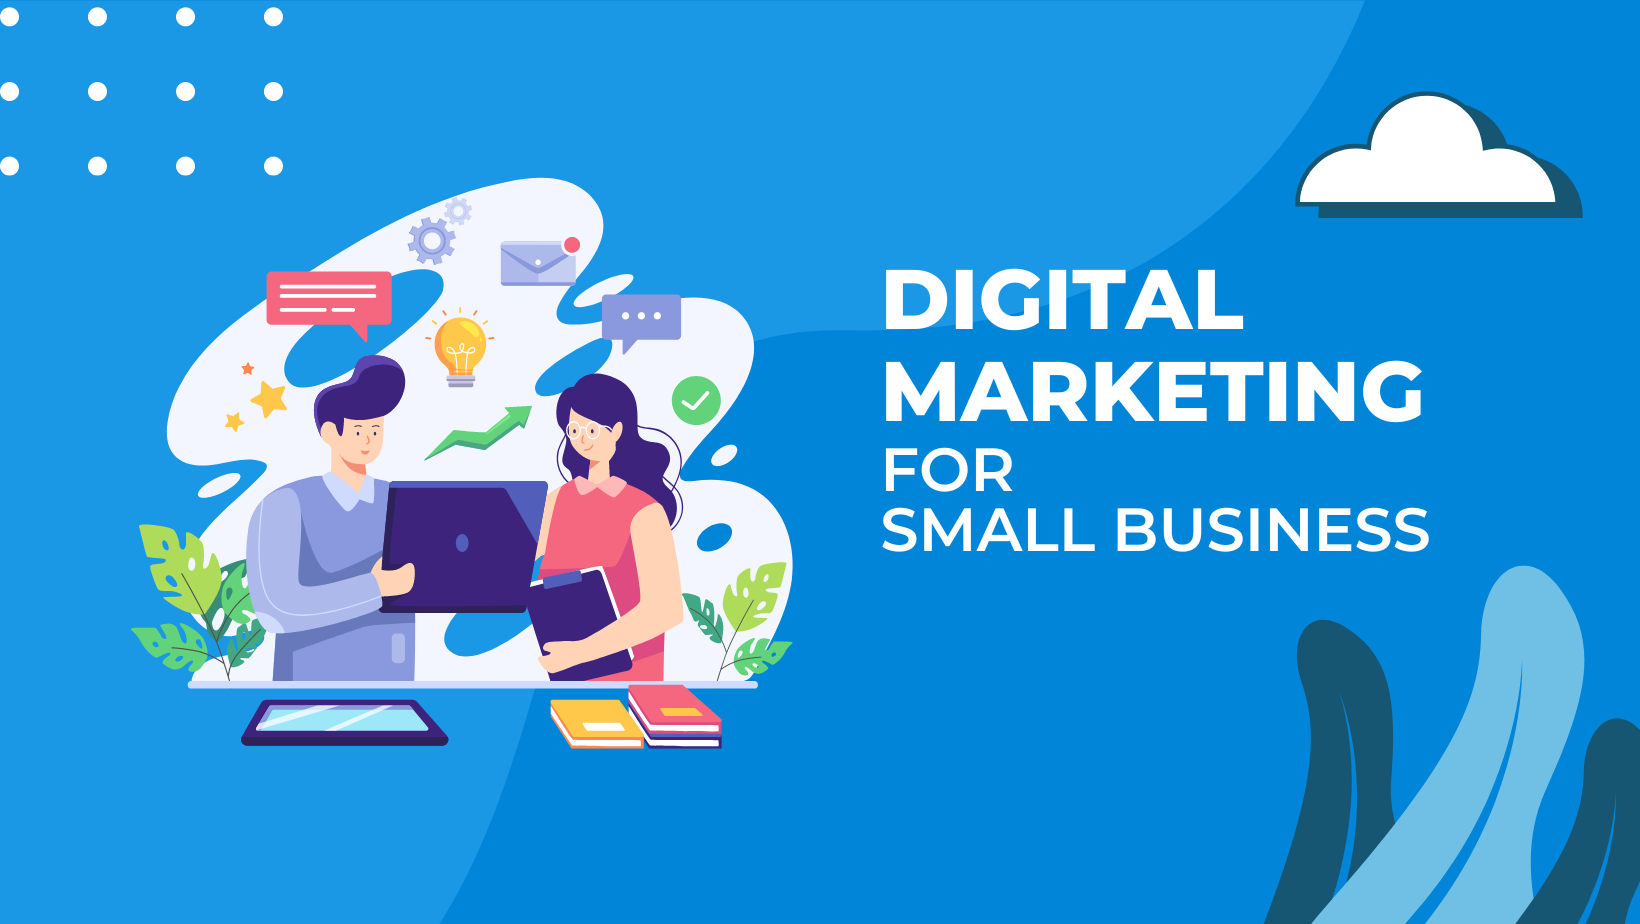 How can small businesses leverage digital marketing to compete with larger competitors?
